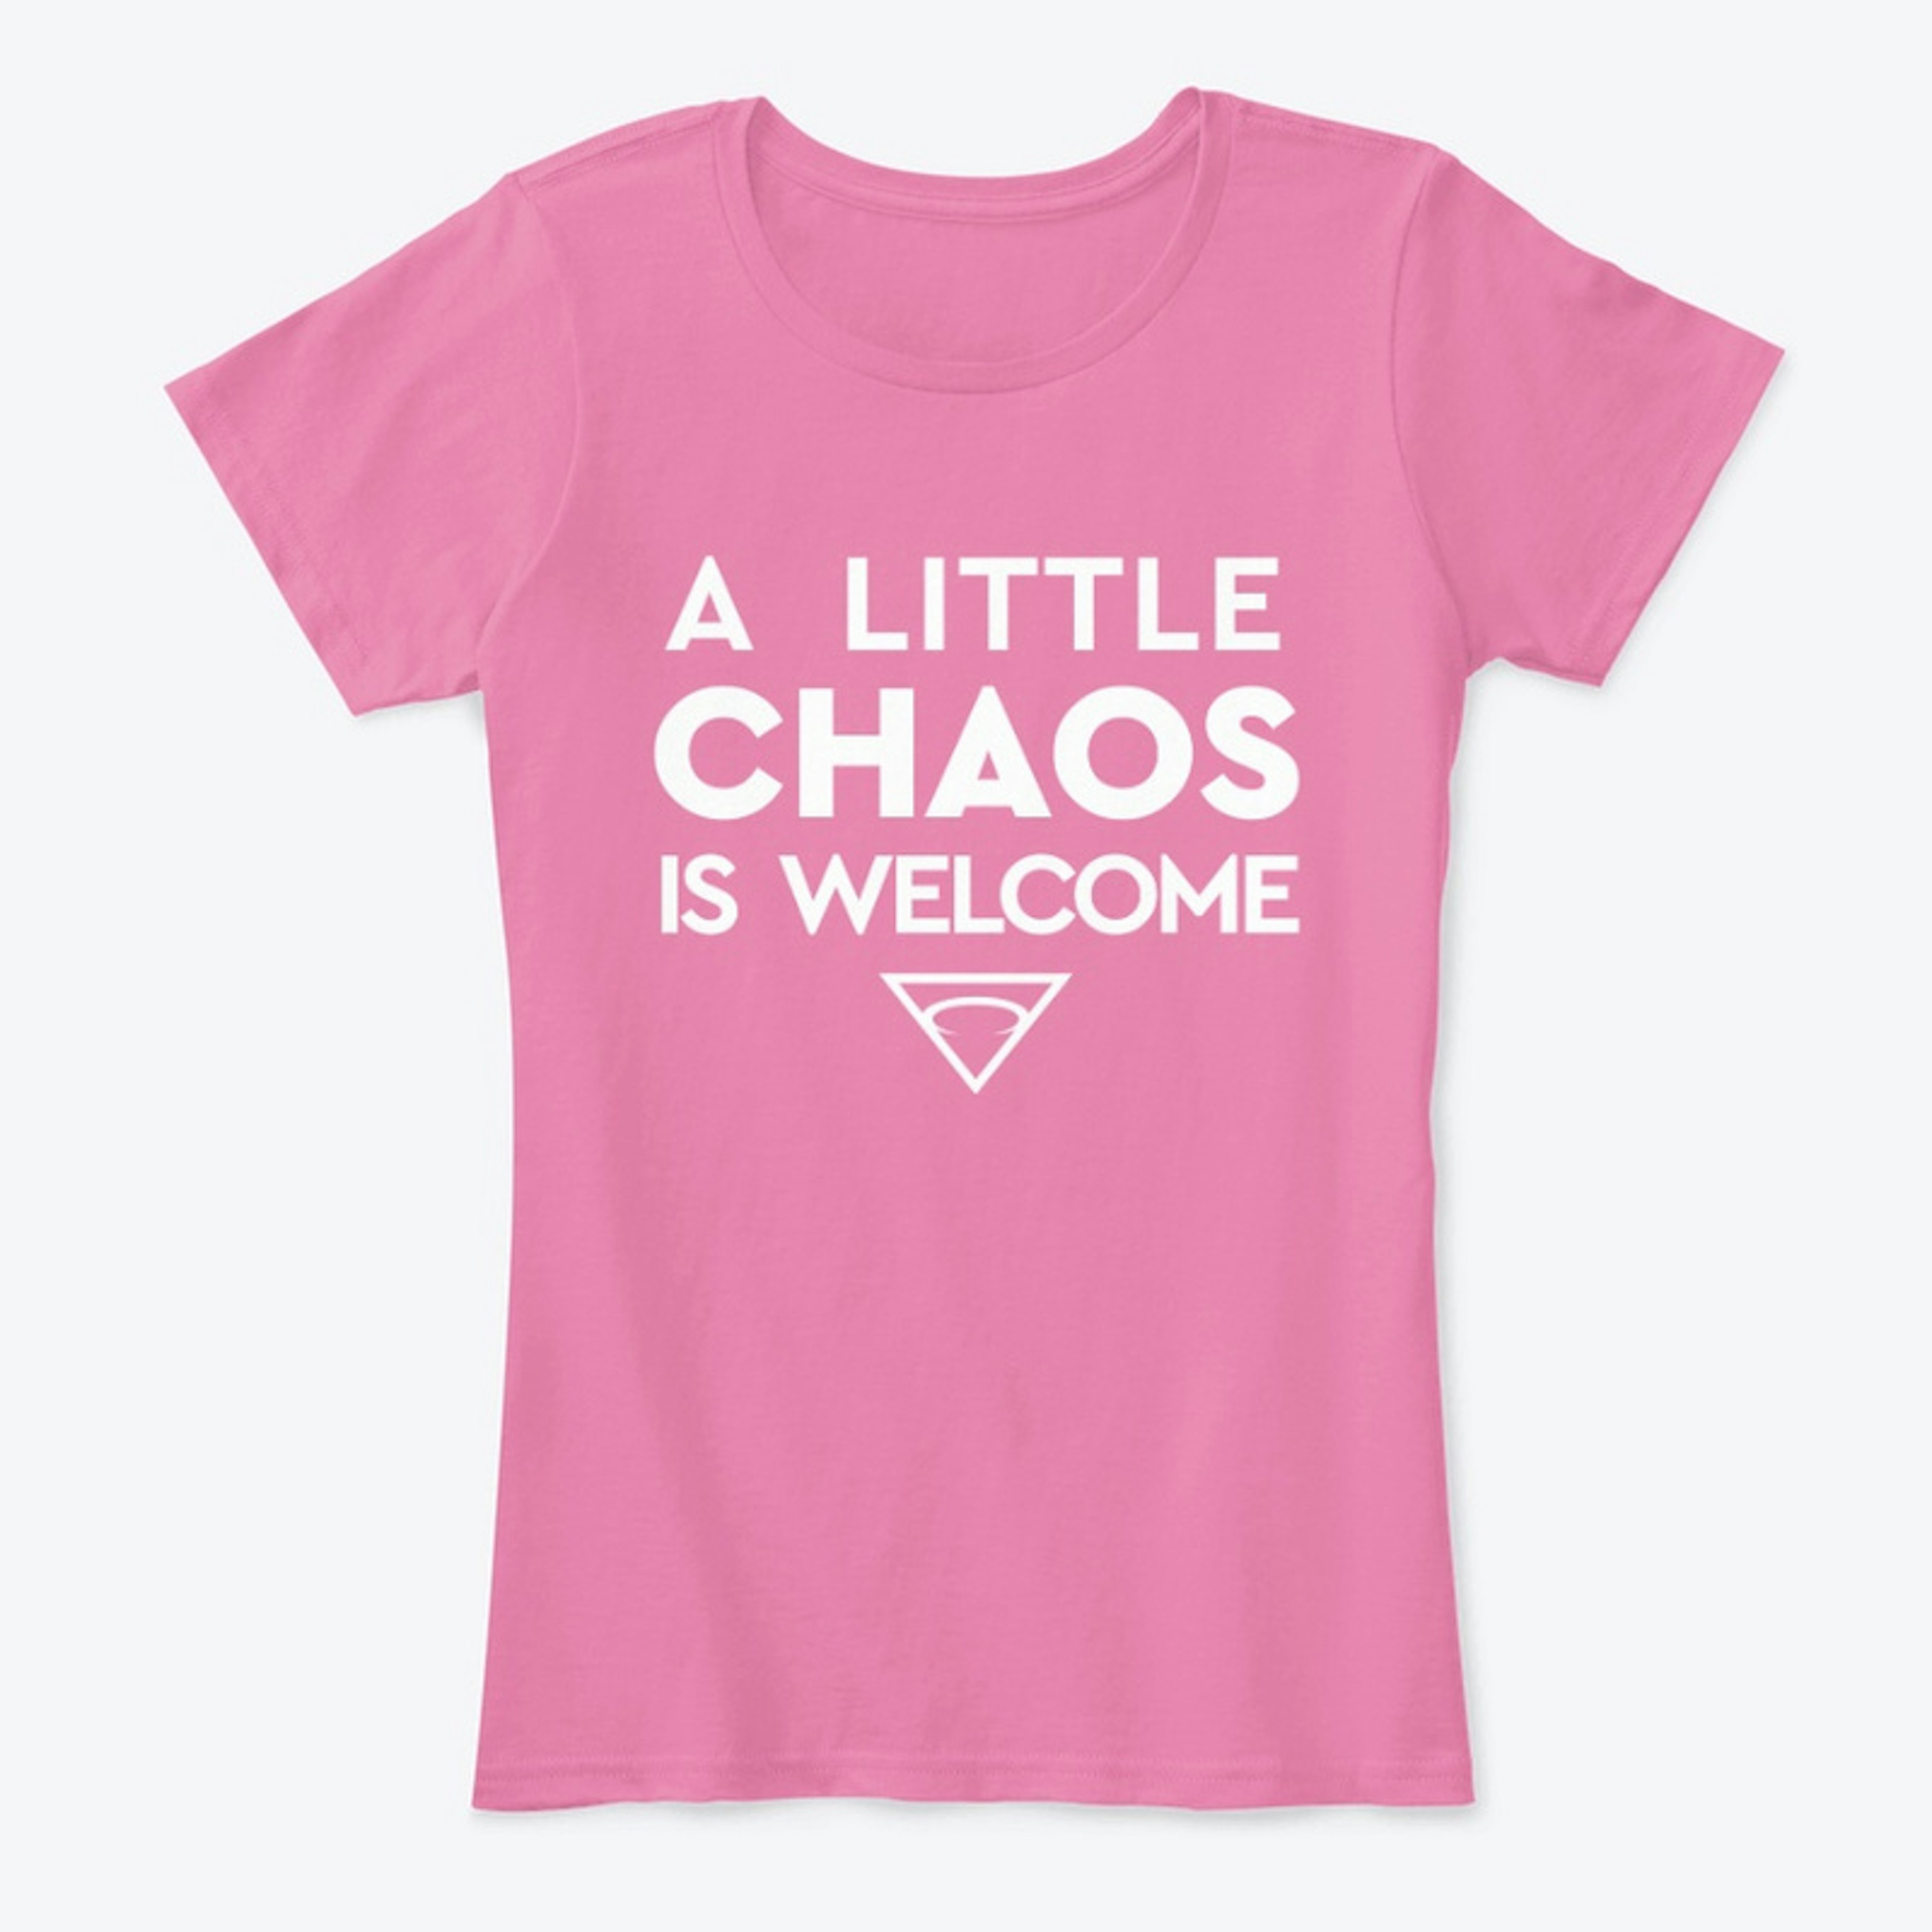 "A Little Chaos Is Welcome"